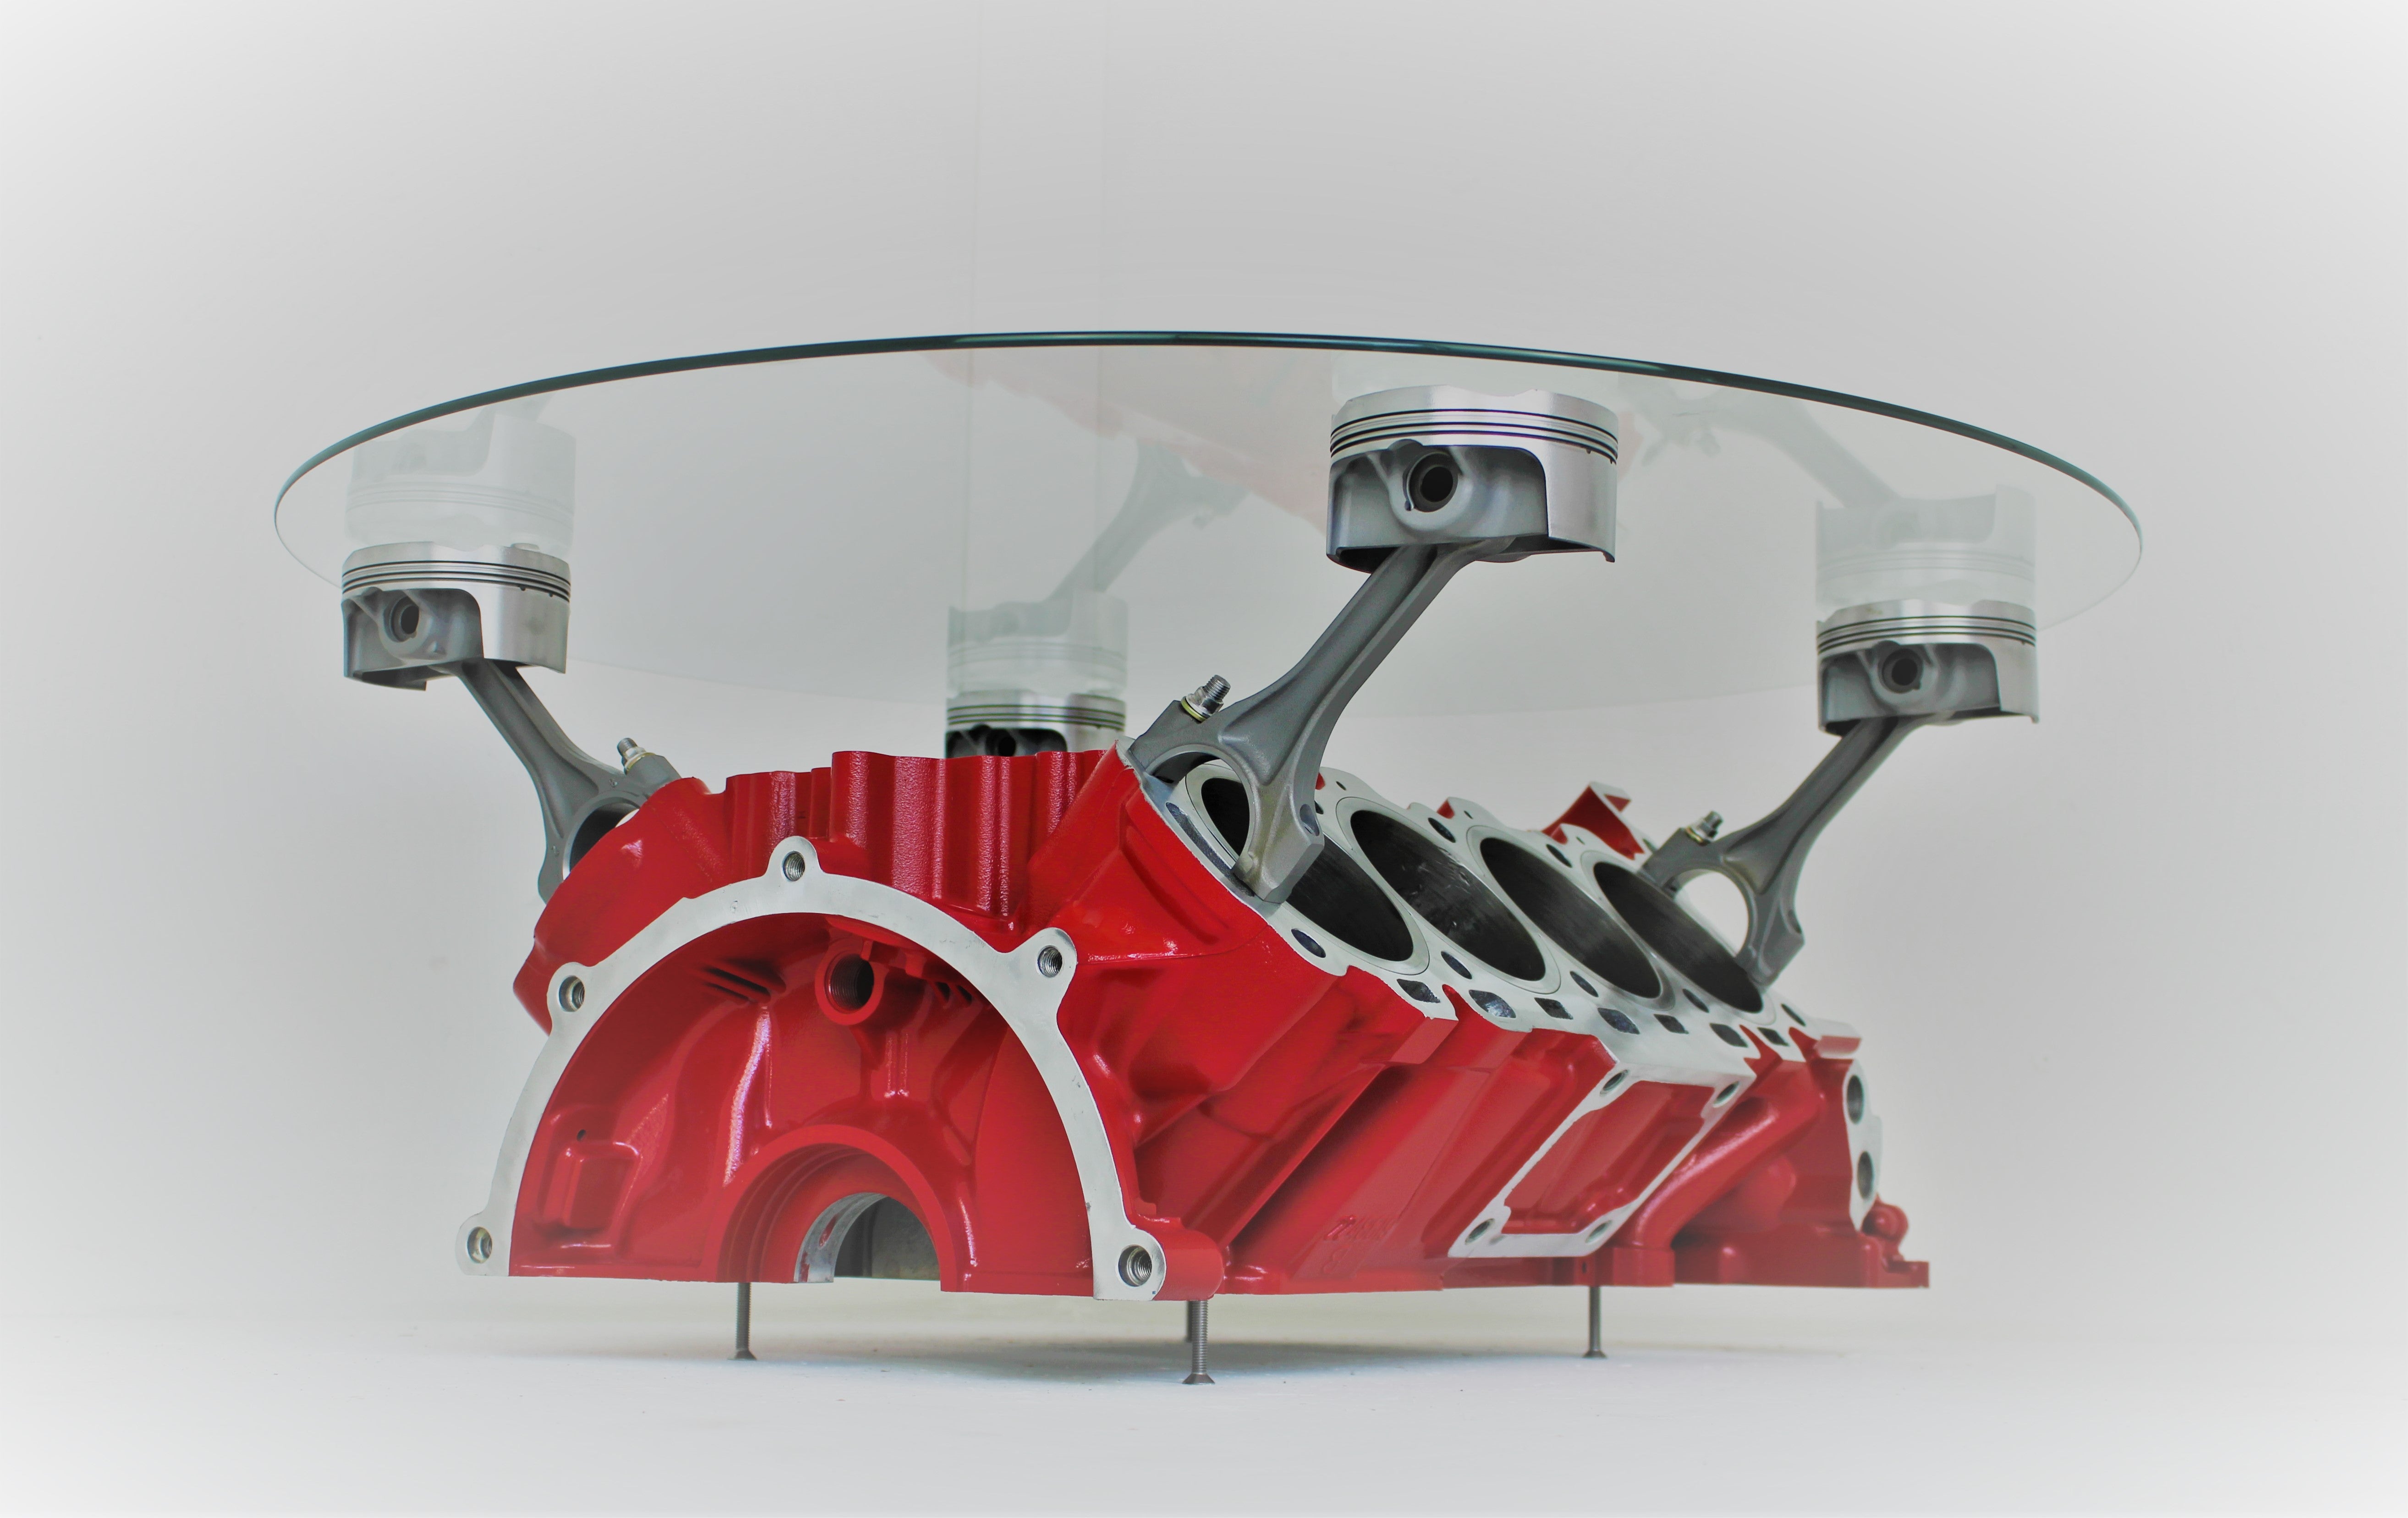 Engine block coffee table painted red, with its round glass top being held up by car engine pistons.